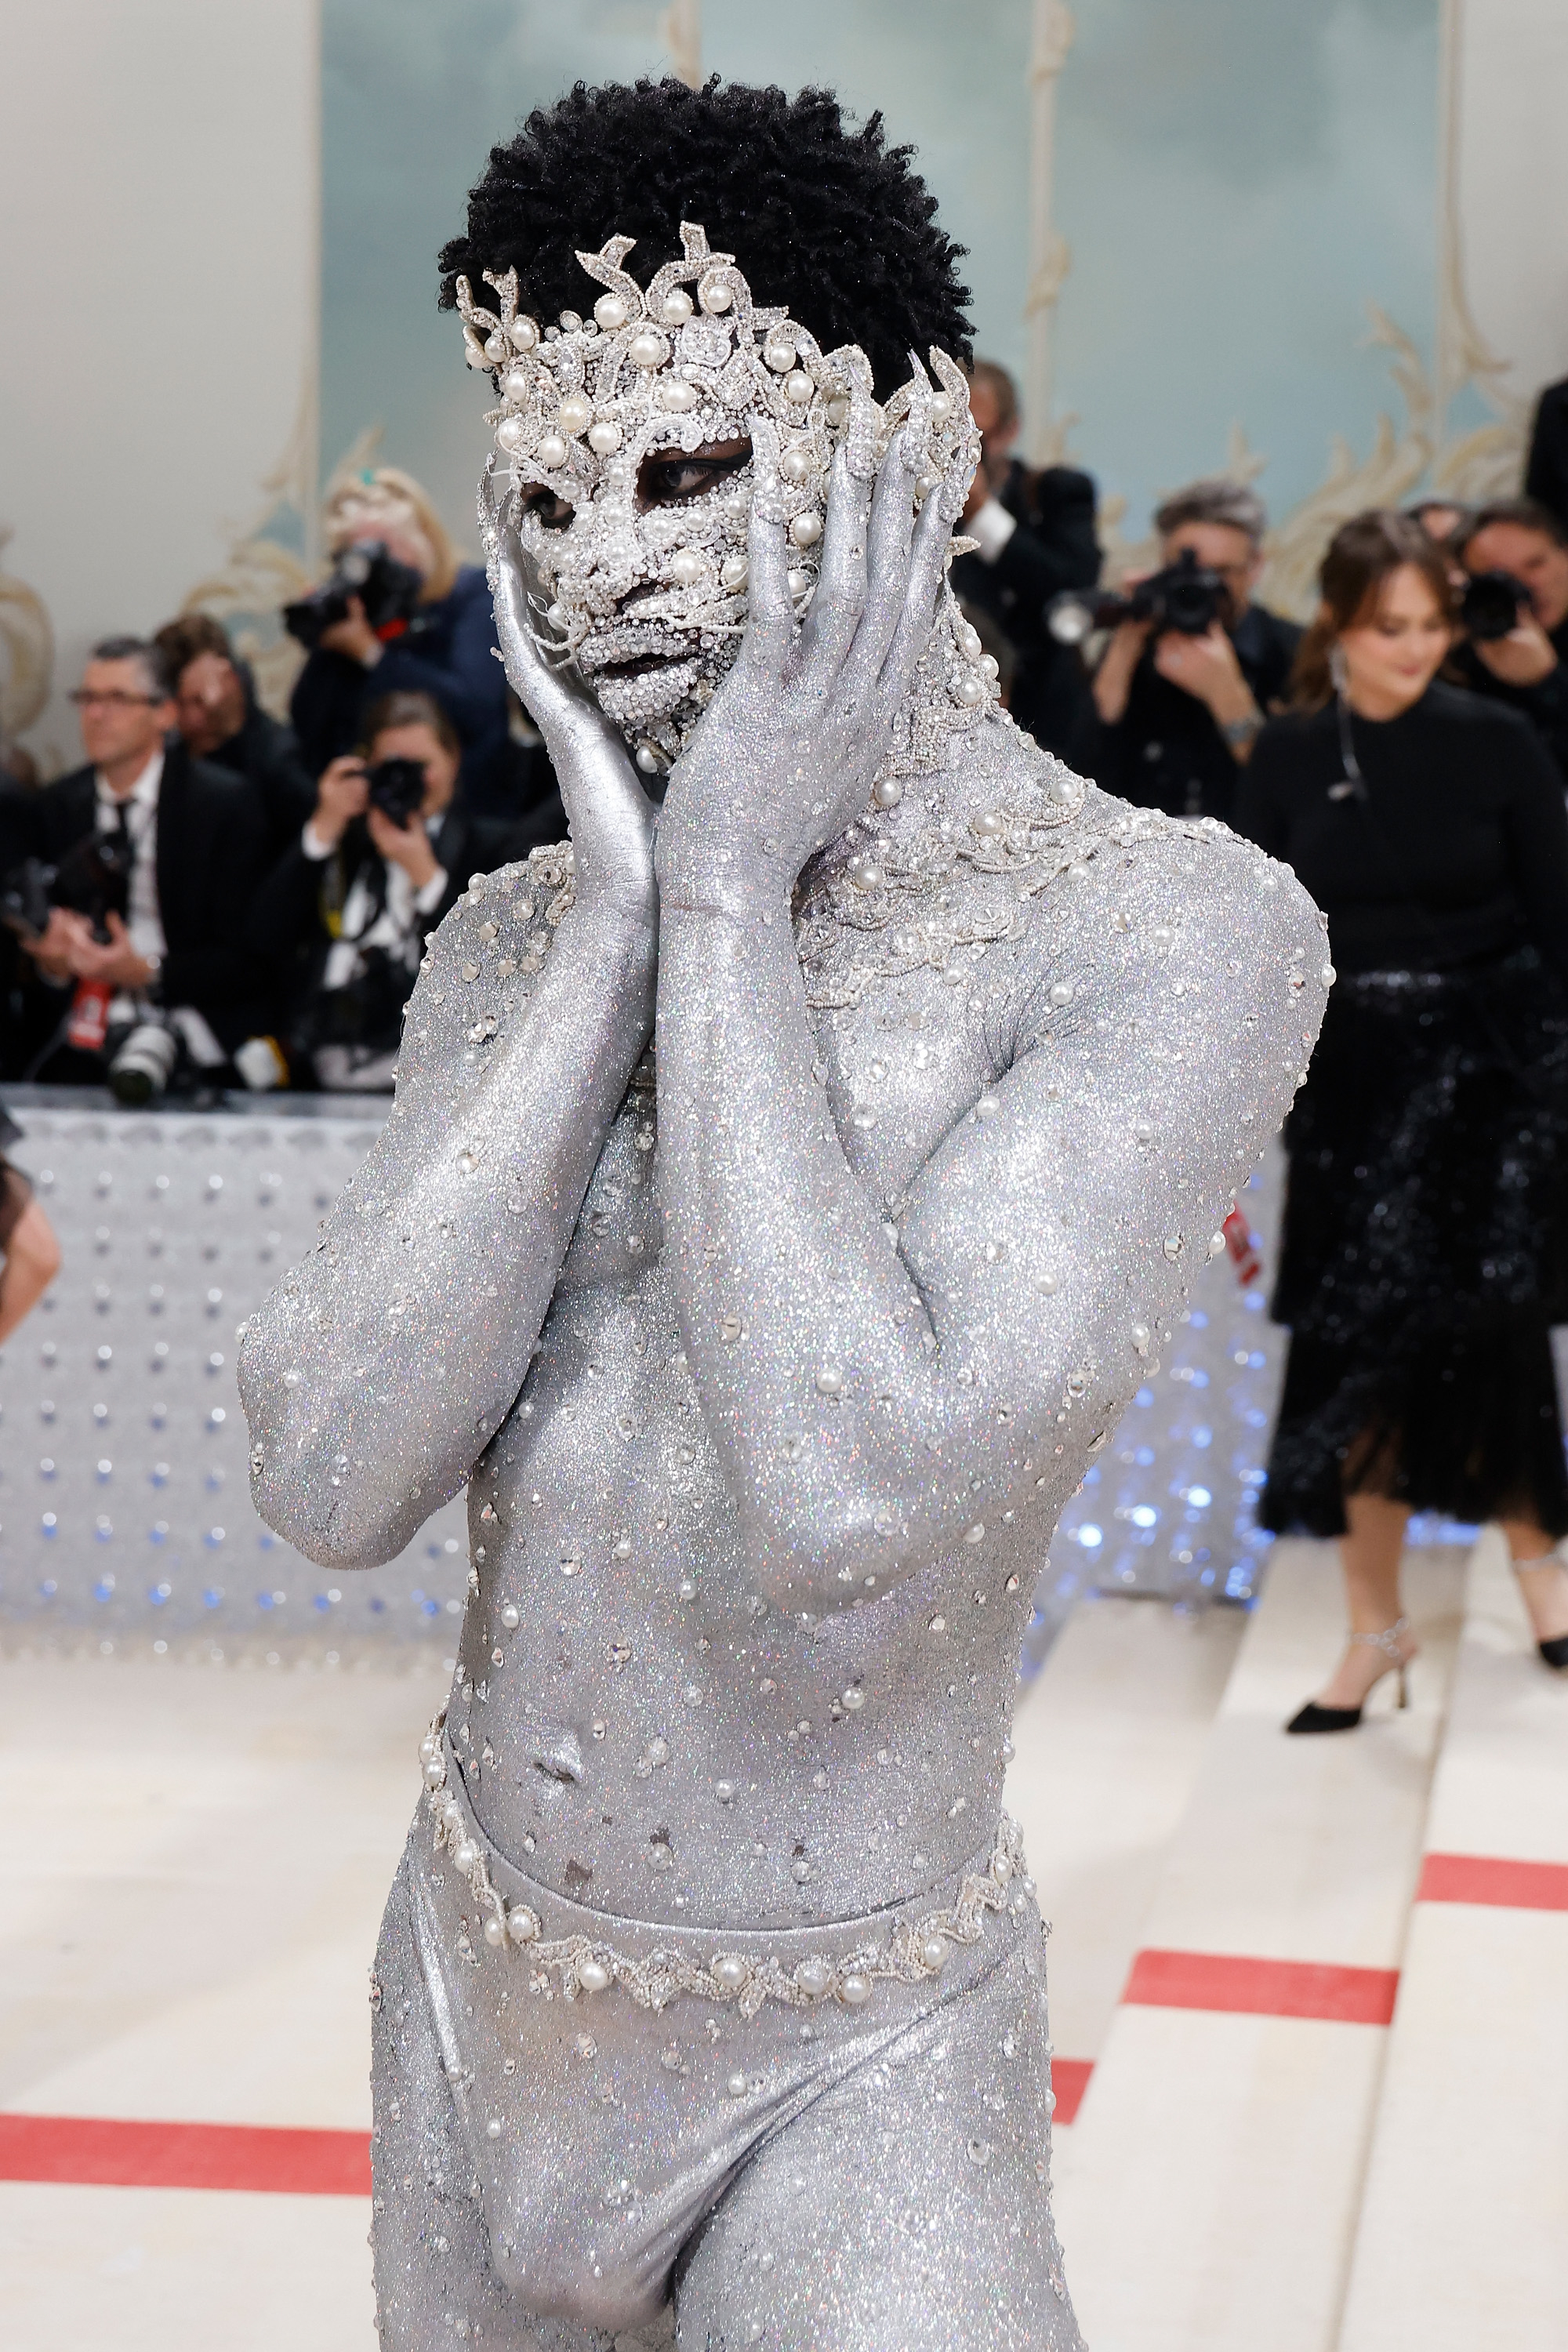 Lil Nas X in a metallic outfit at the Met Gala